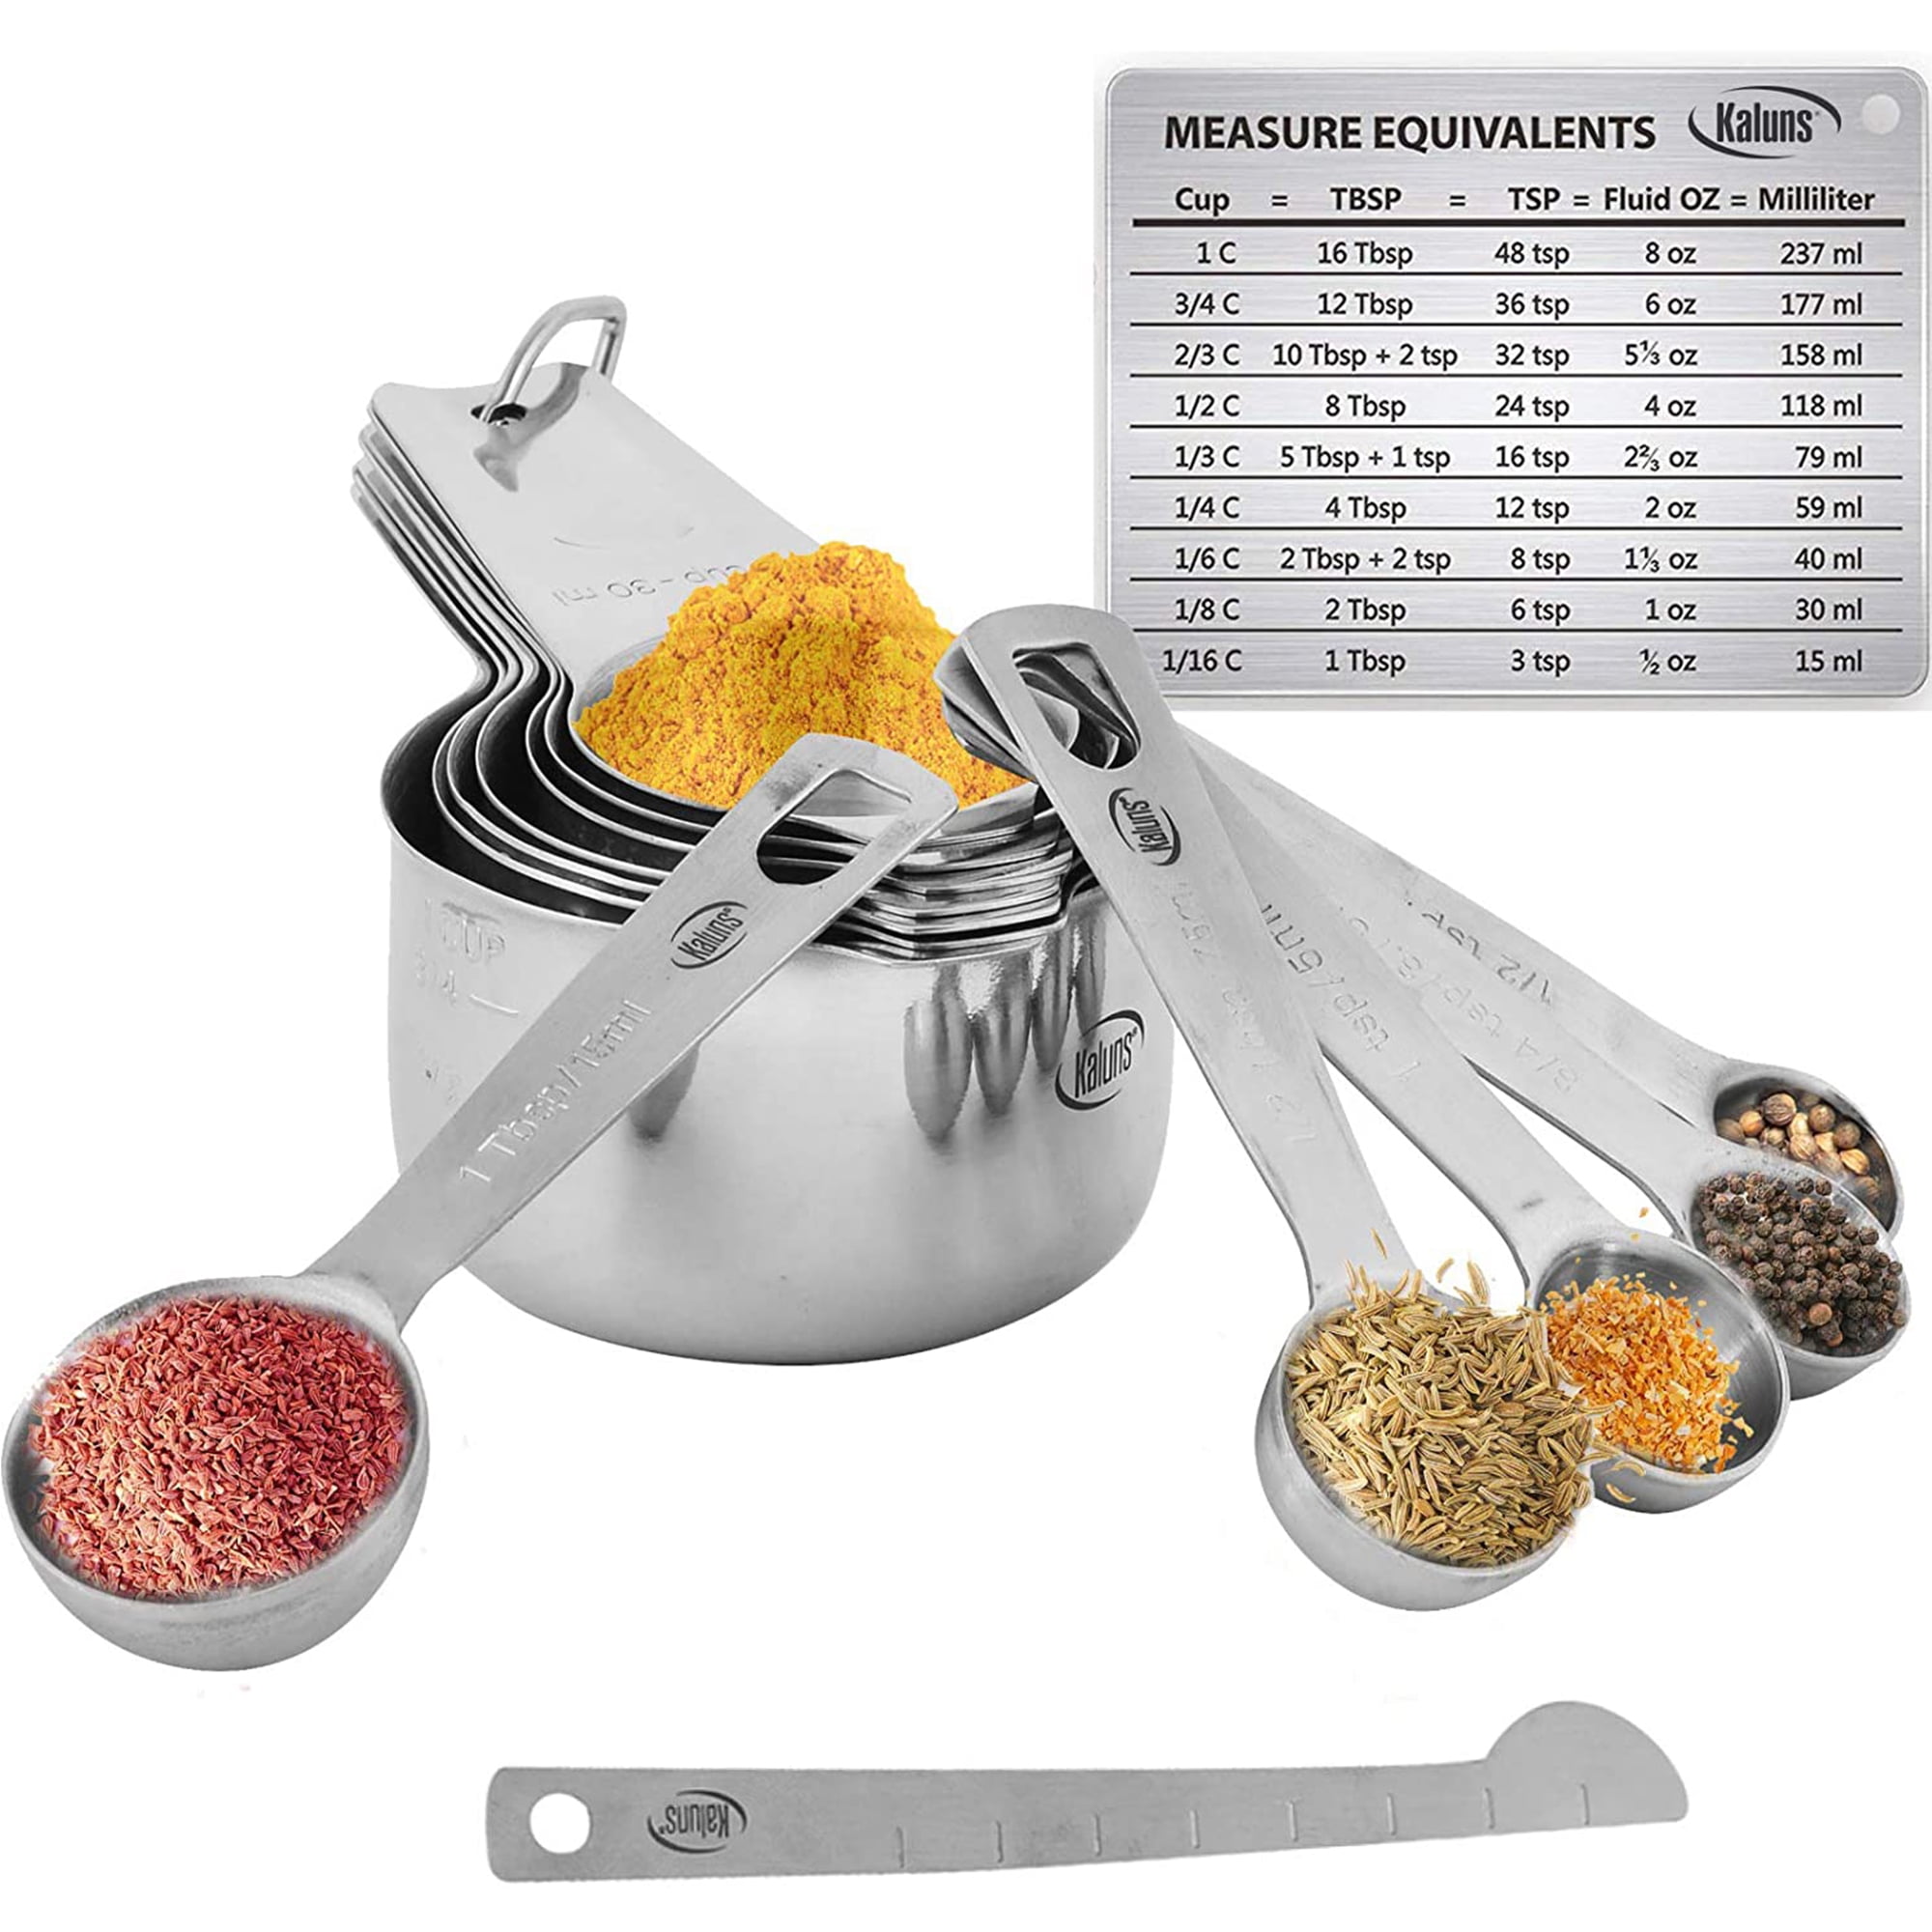 Cuisipro Stainless Steel 4 piece Measuring Cup Set 1c, 1/2c, 1/3c, 1/4c